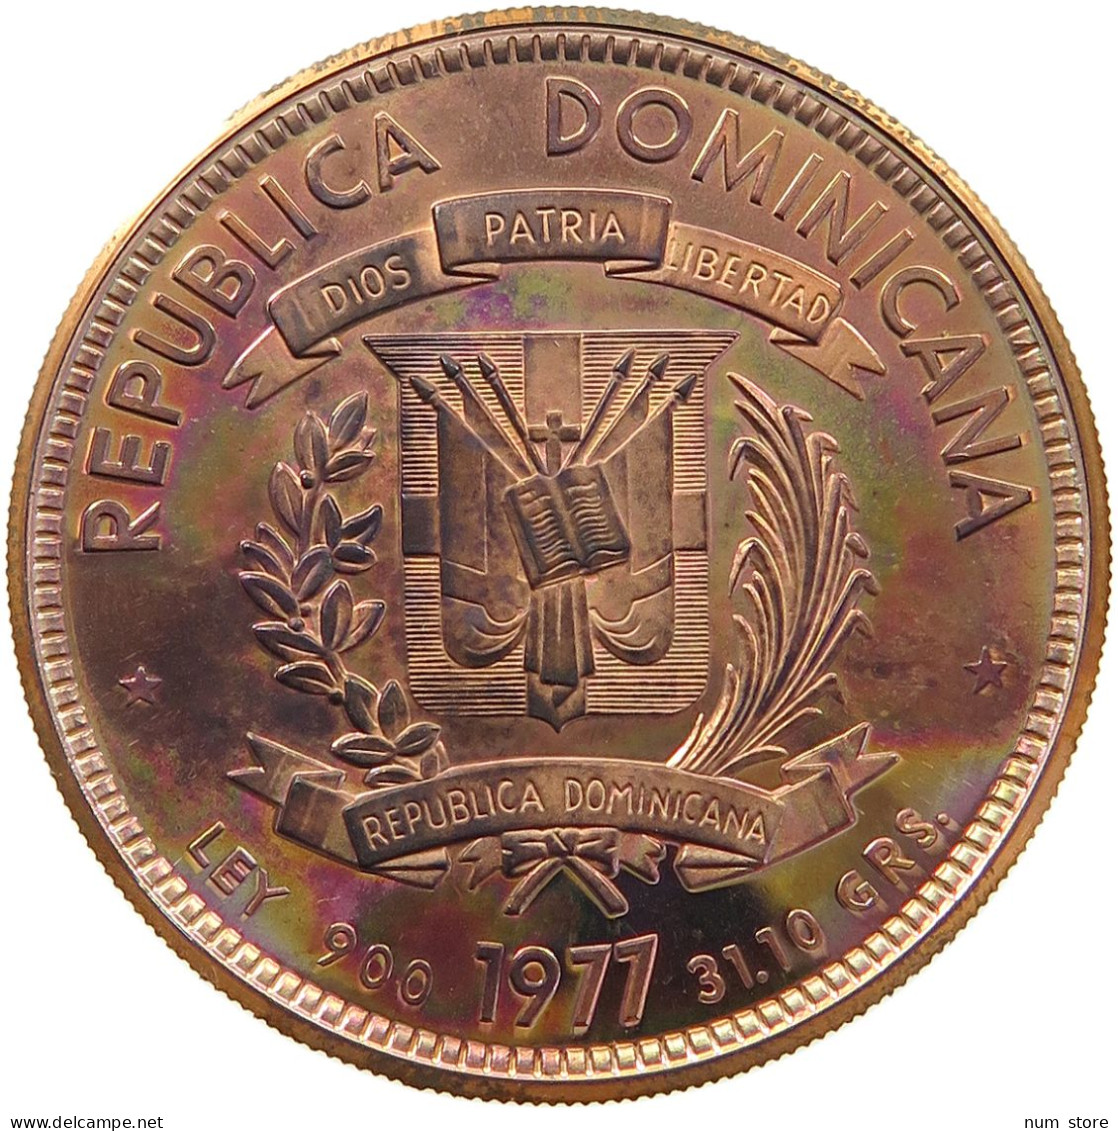 DOMINICAN REPUBLIC 200 PESOS 1977 DOMINICAN REPUBLIC 200 PESOS 1977 COPPER PROOF PATTERN #t084 0125 - Dominicaine